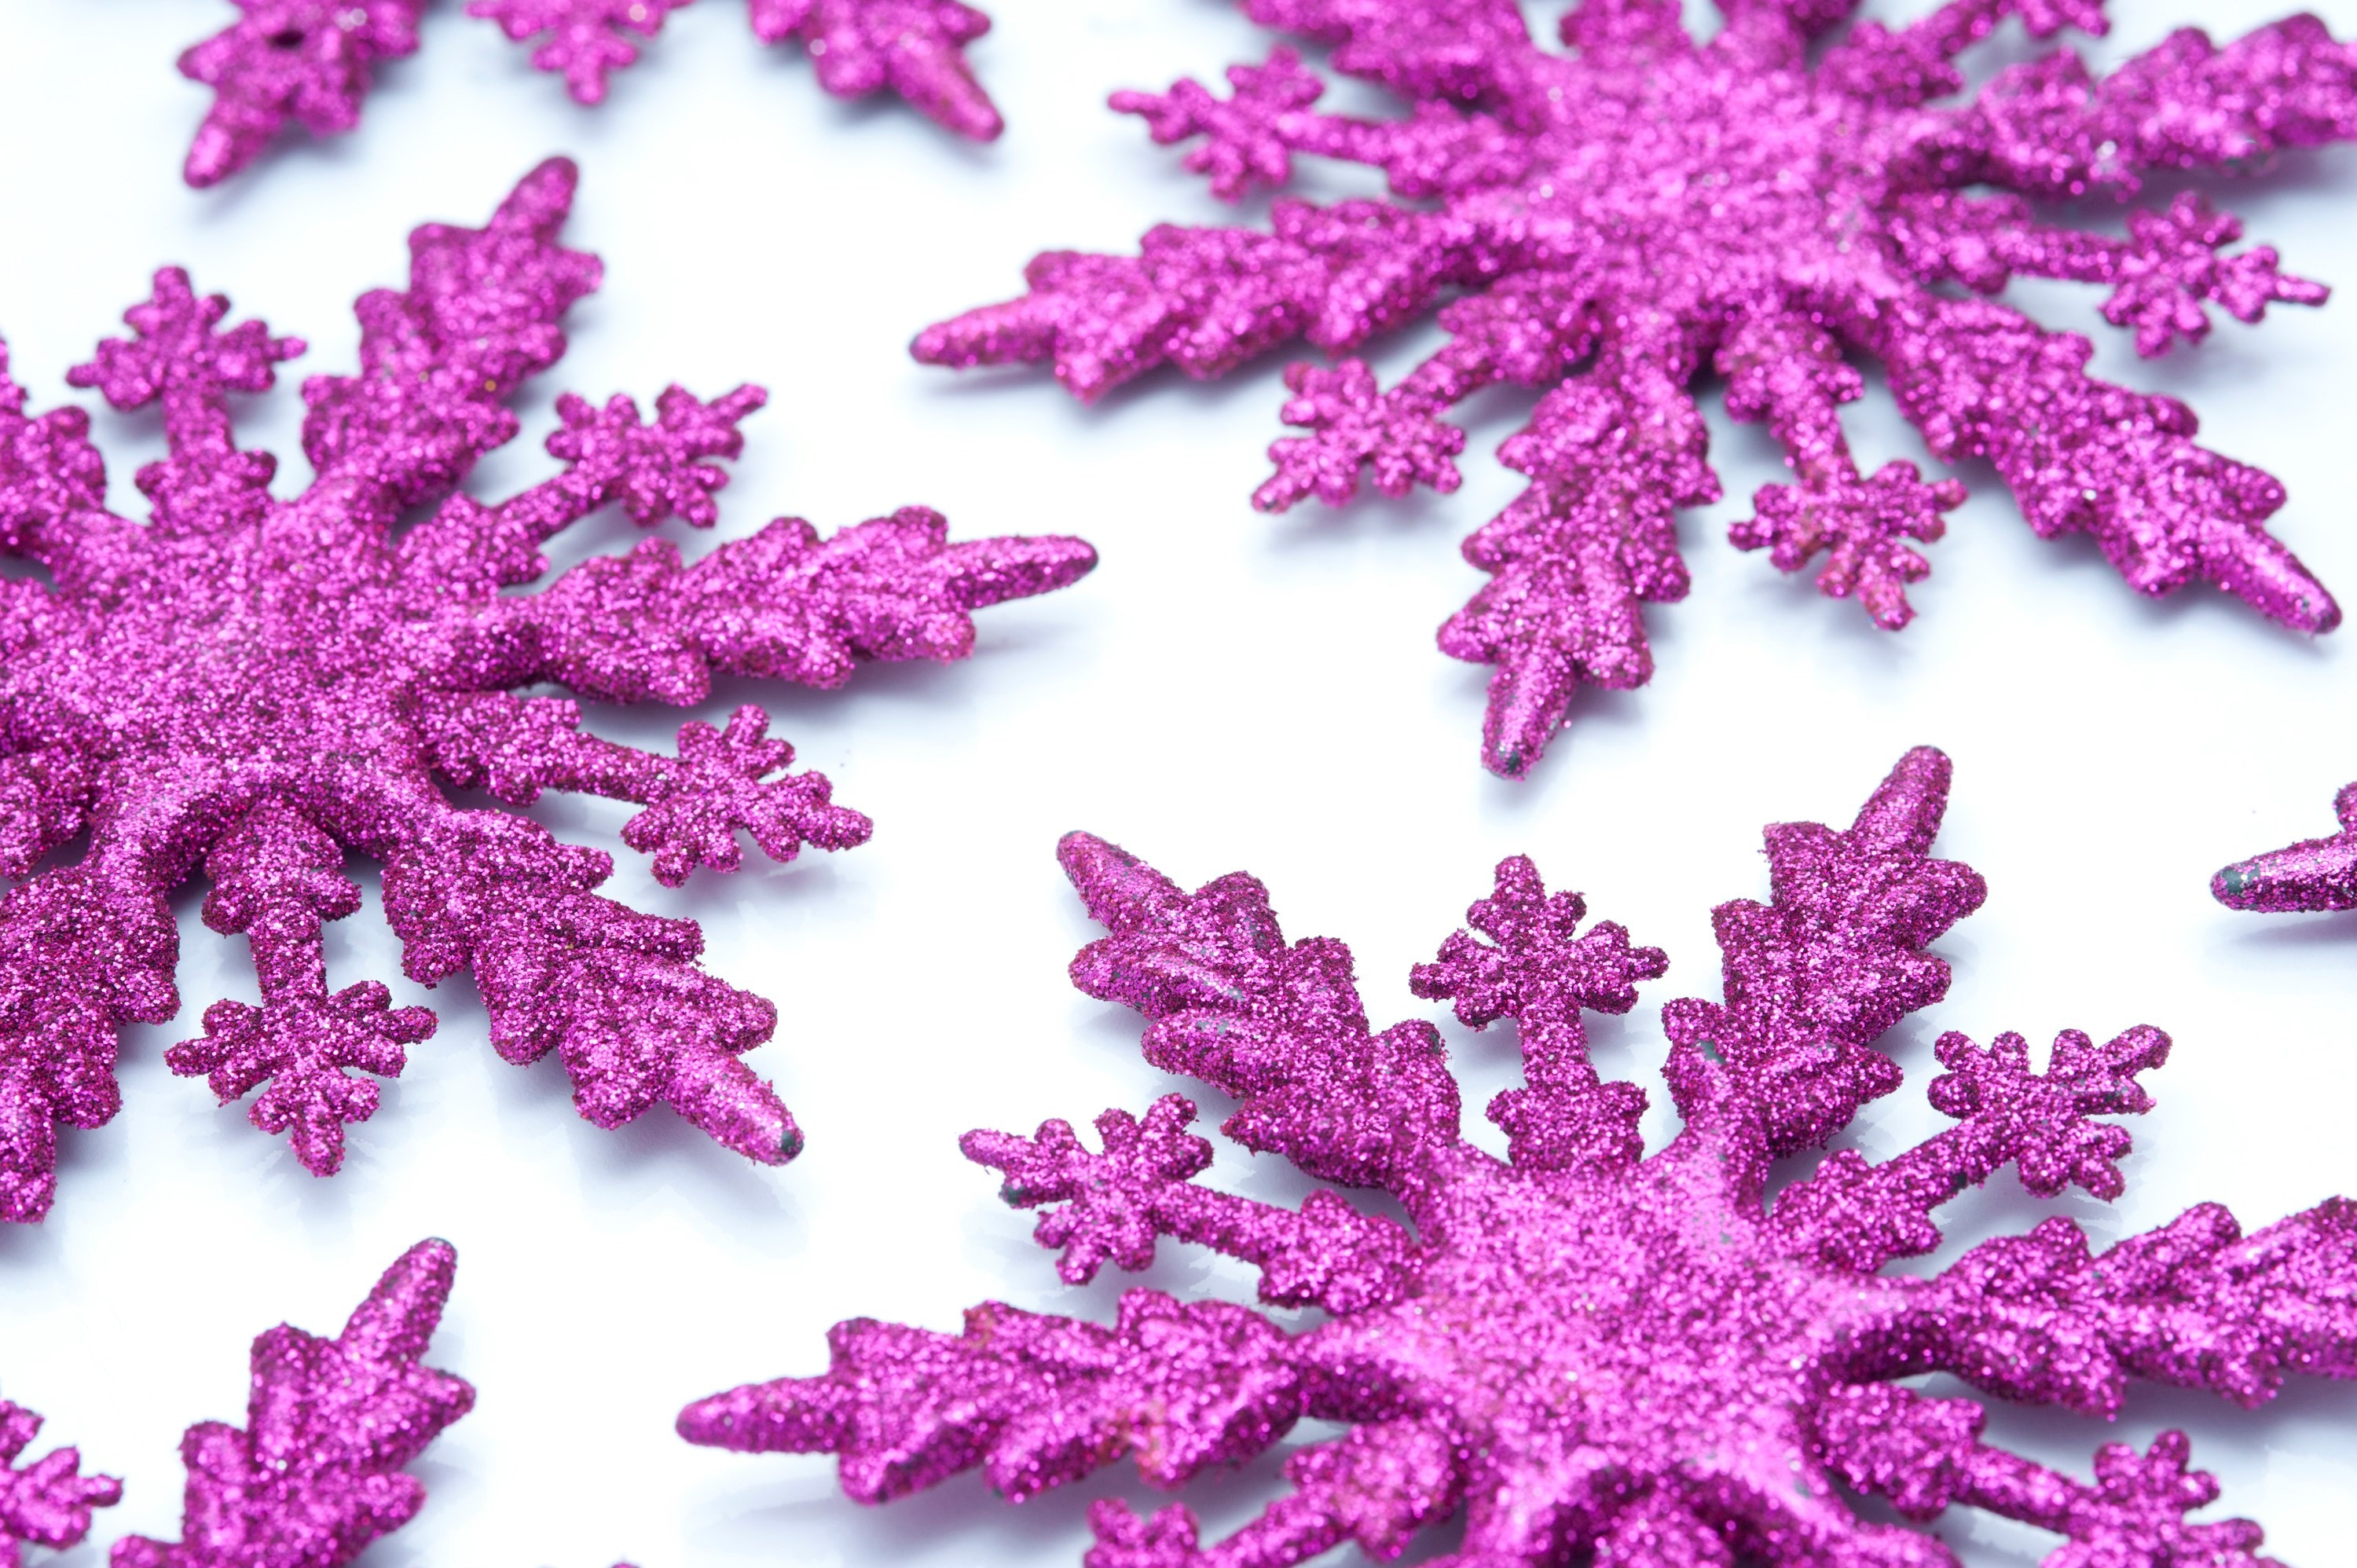 3000x1996 Pink Snowflake Christmas Ornament - See more similiar images at  backgroundimages.